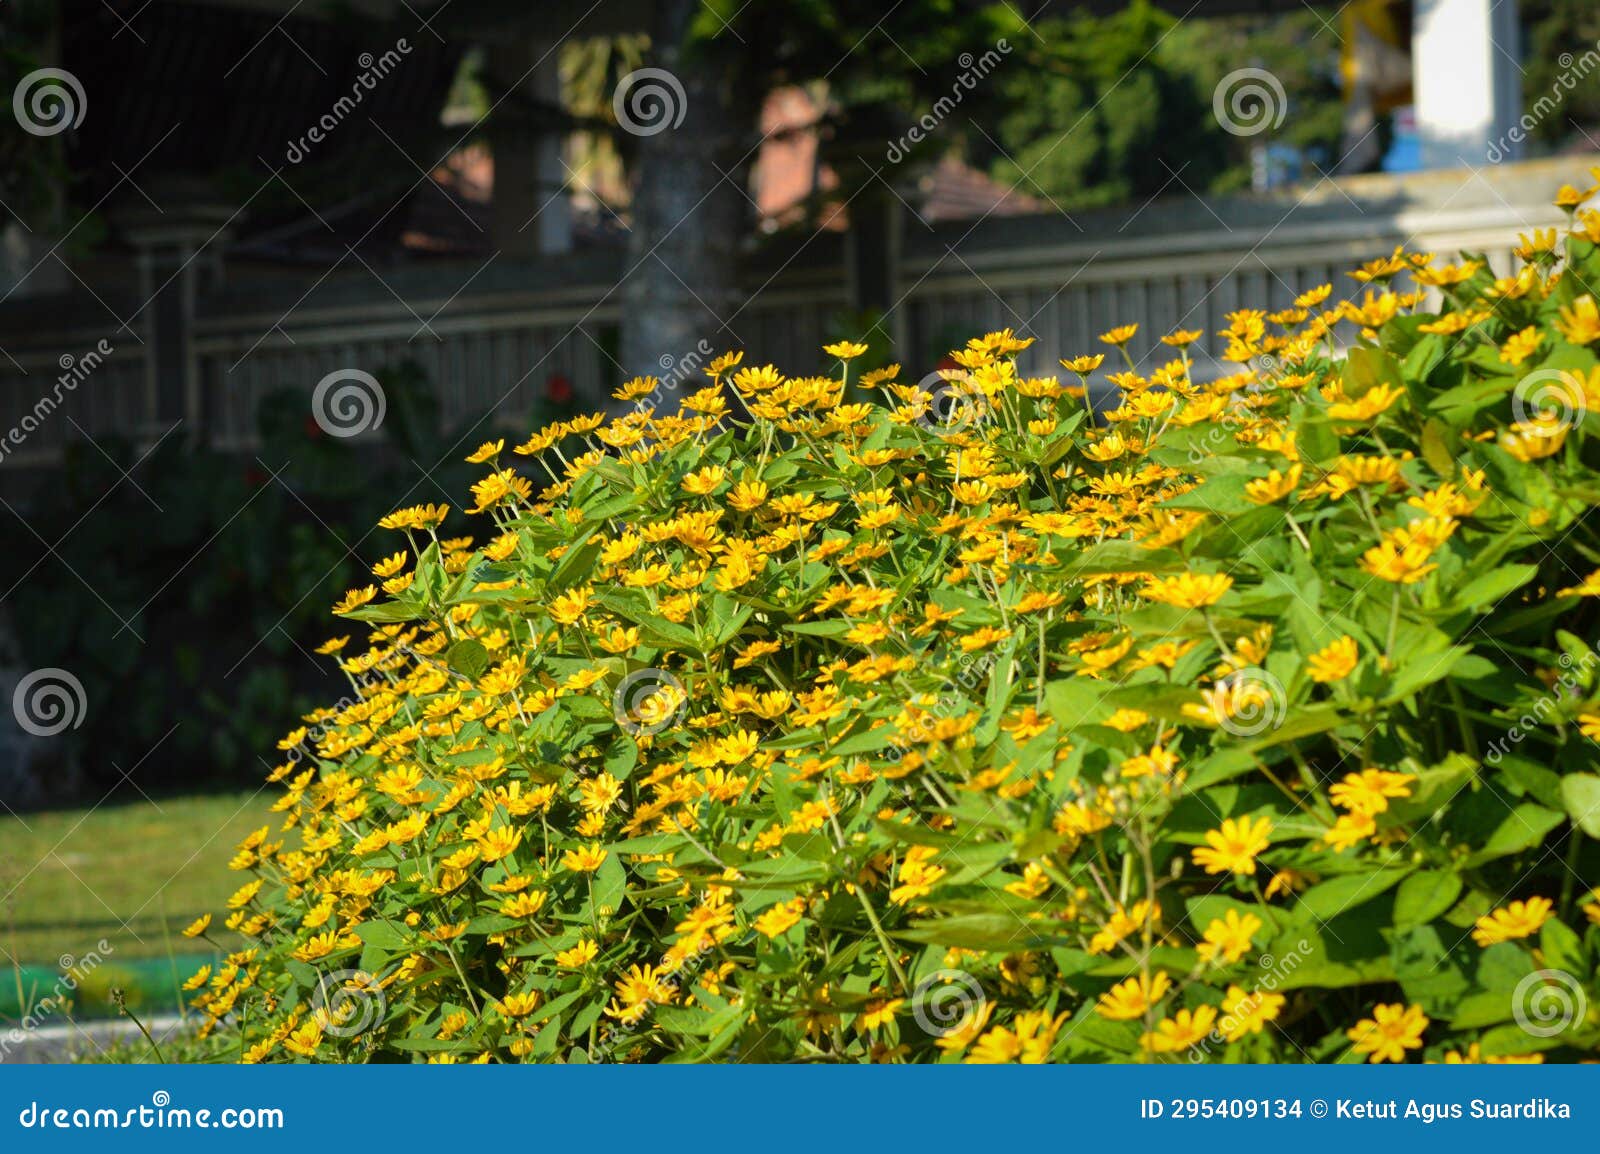 freshness warm sunlight on a group of small yellow-flowered melampodium divaricatum plants blooming in the garden